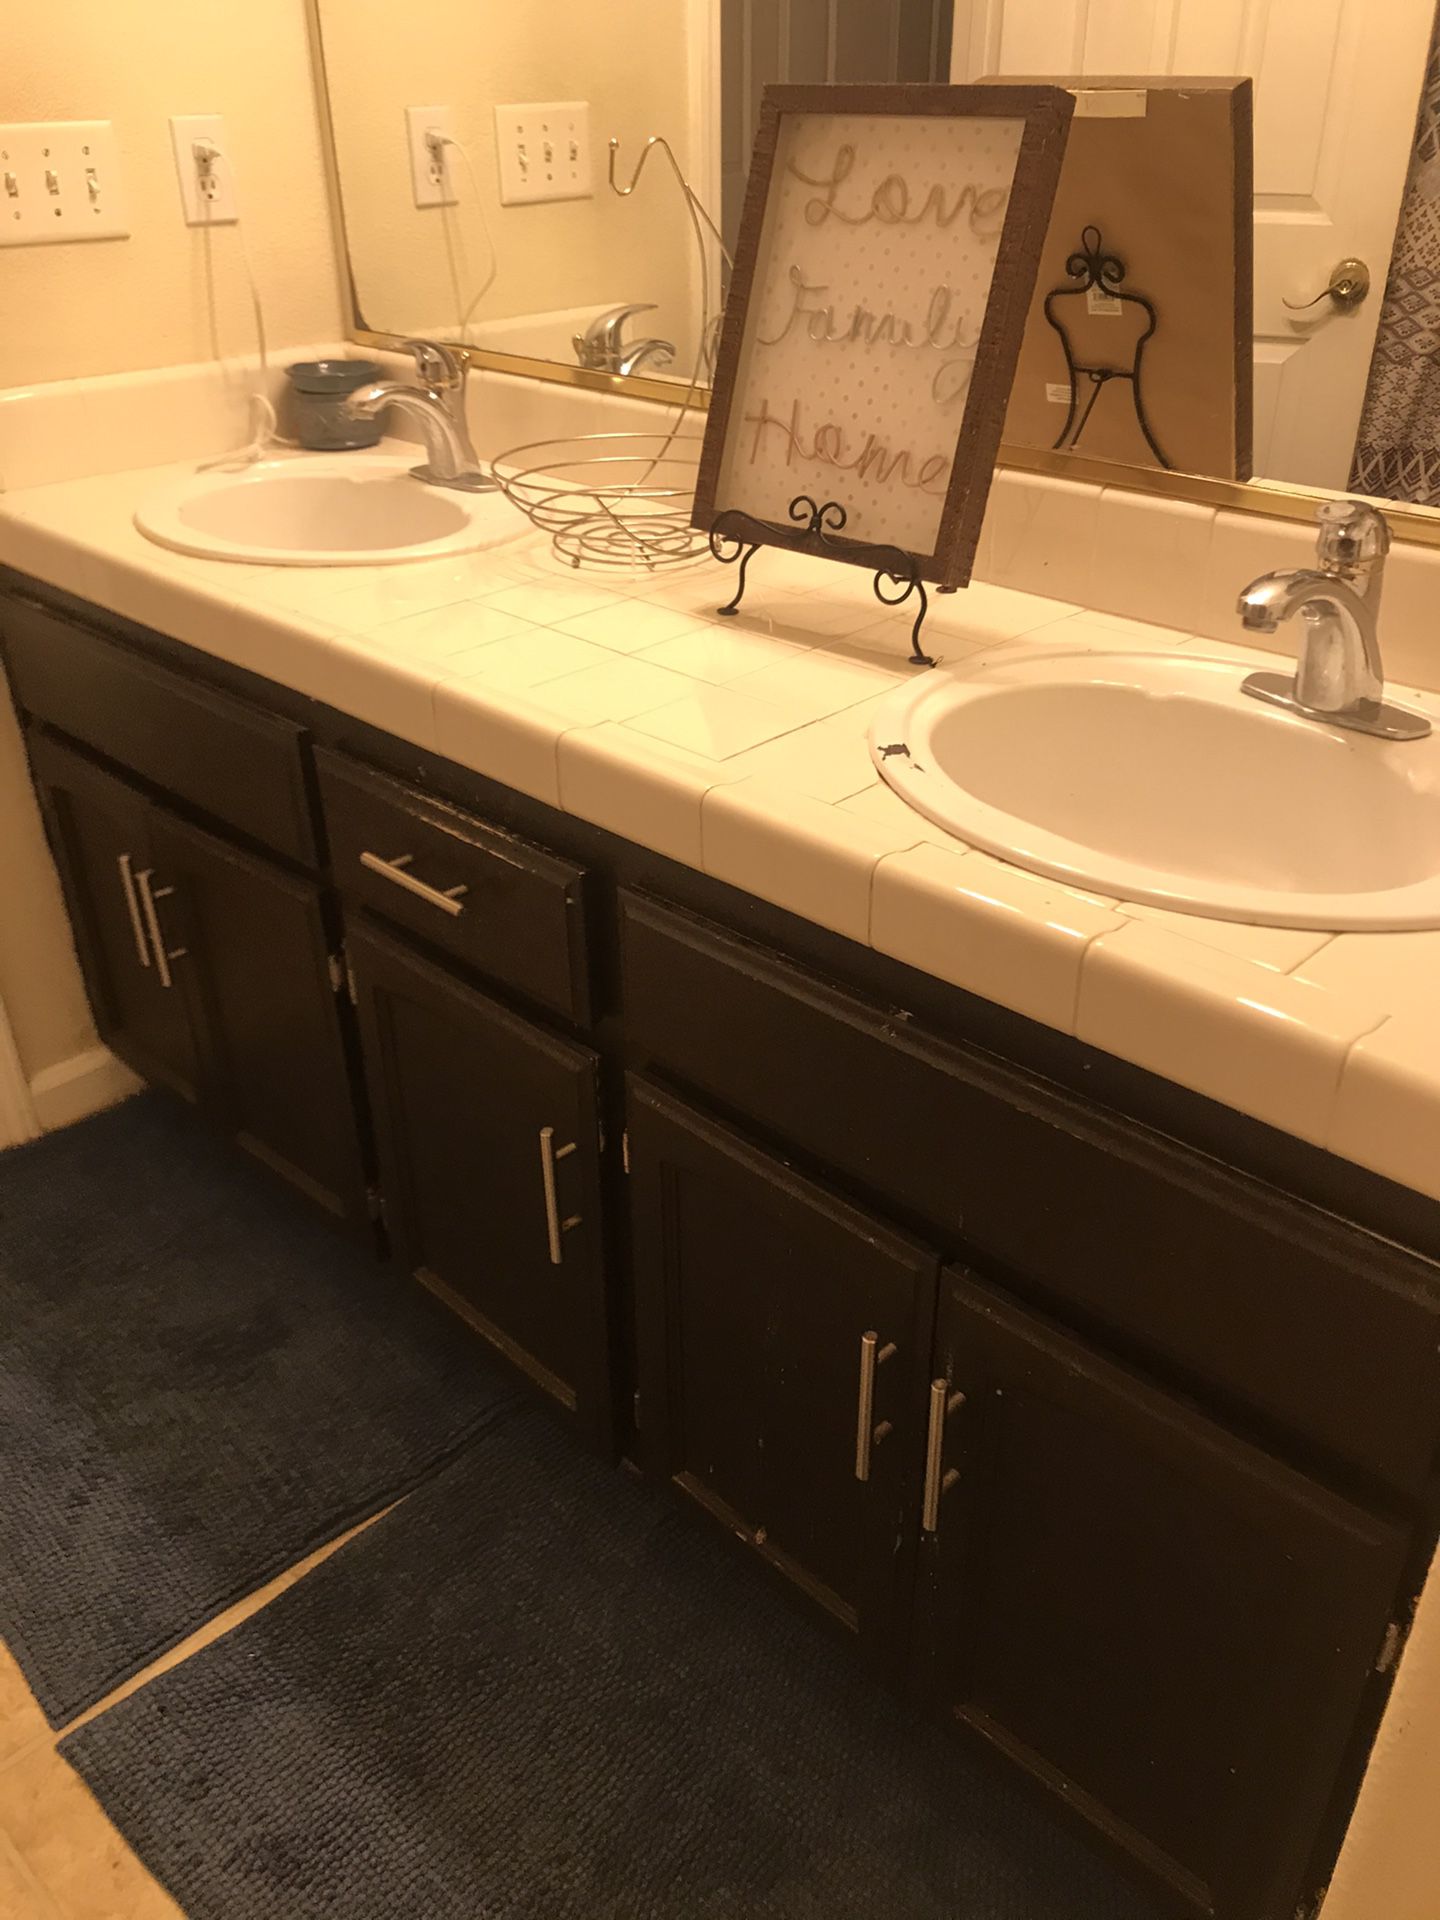 Cabinets 2 bathroom sets of double vanity’s